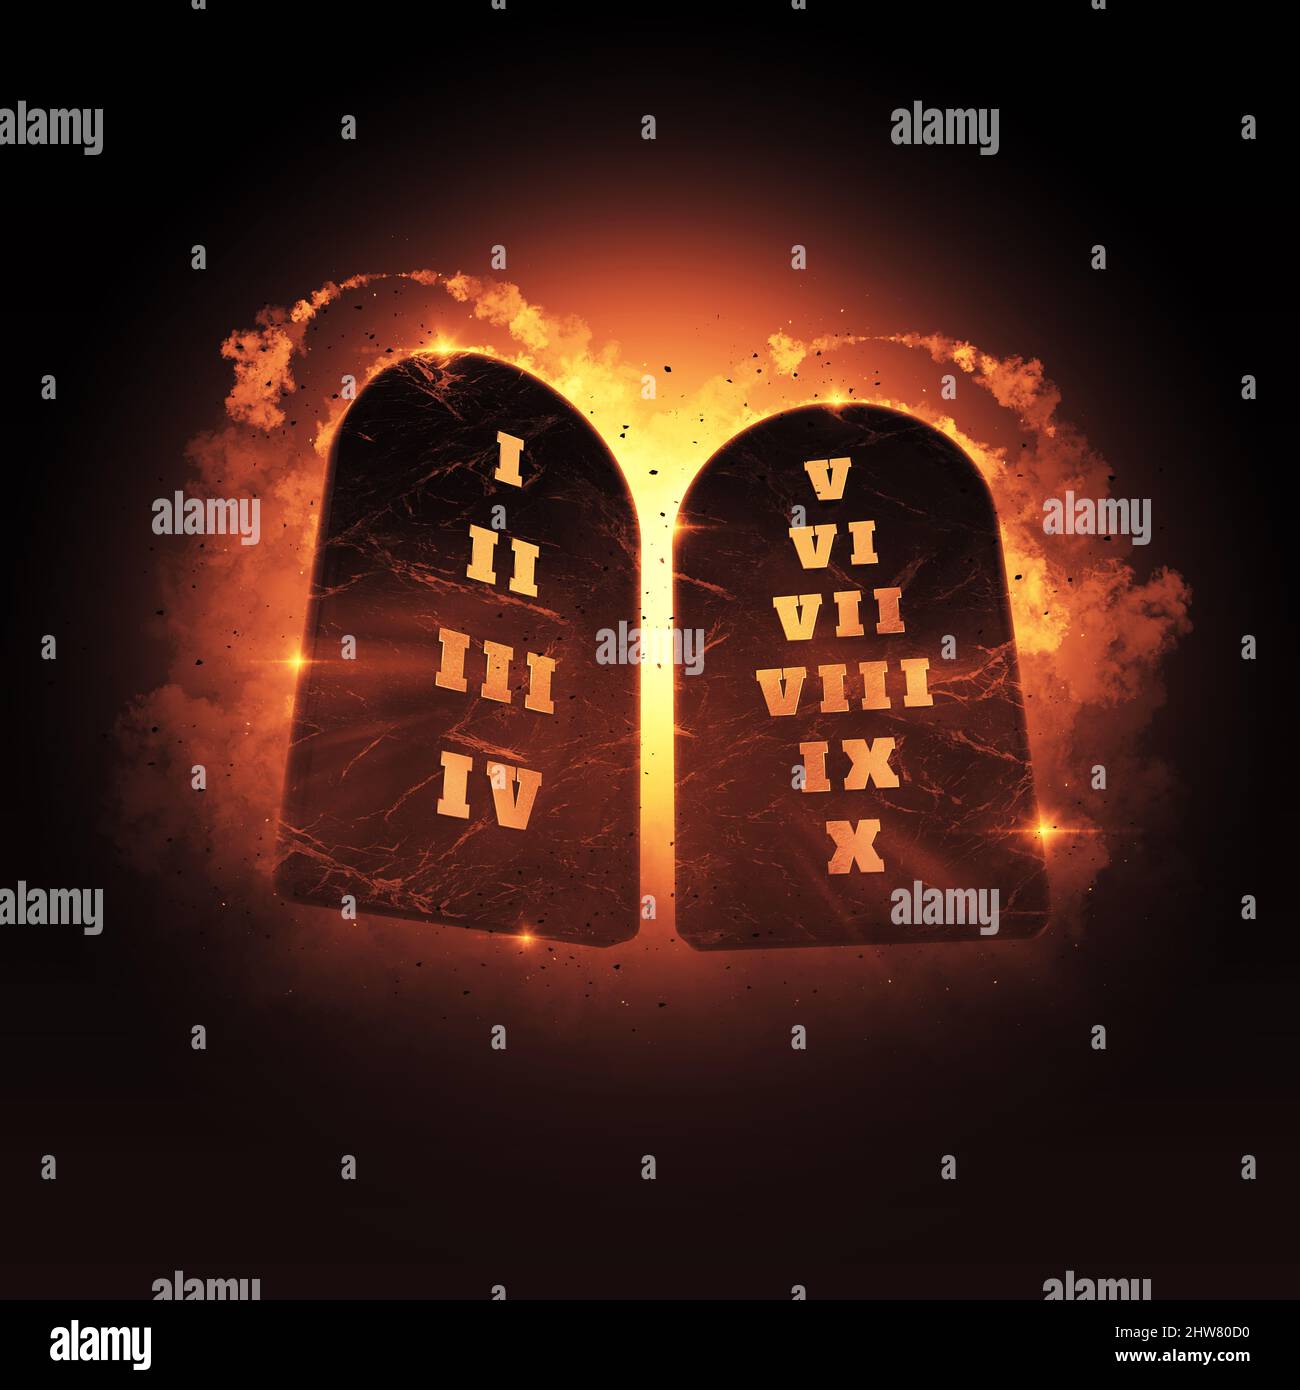 The 10 Ten Commandments of GOD with Fire Background (3D Illustration) Stock Photo